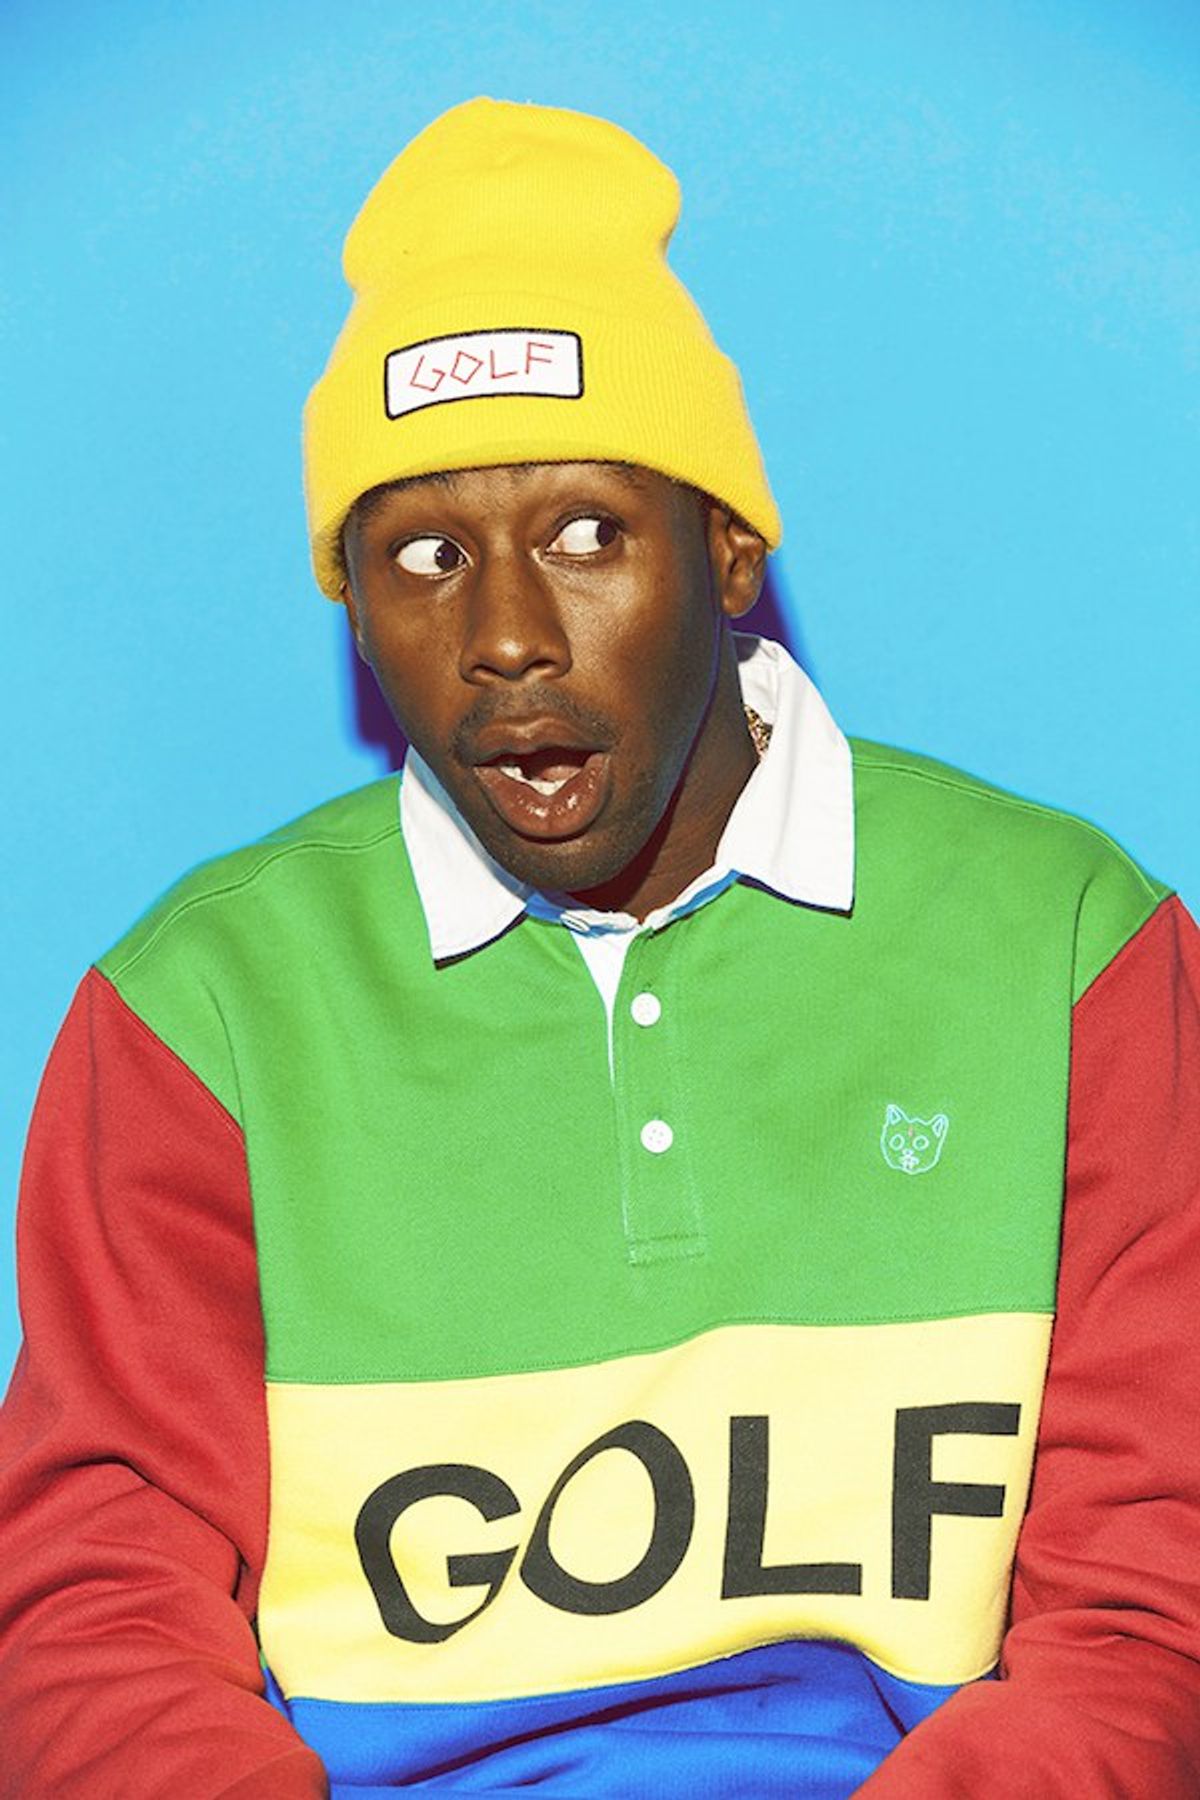 Tyler, The Creator and Fashion— A Good Mix